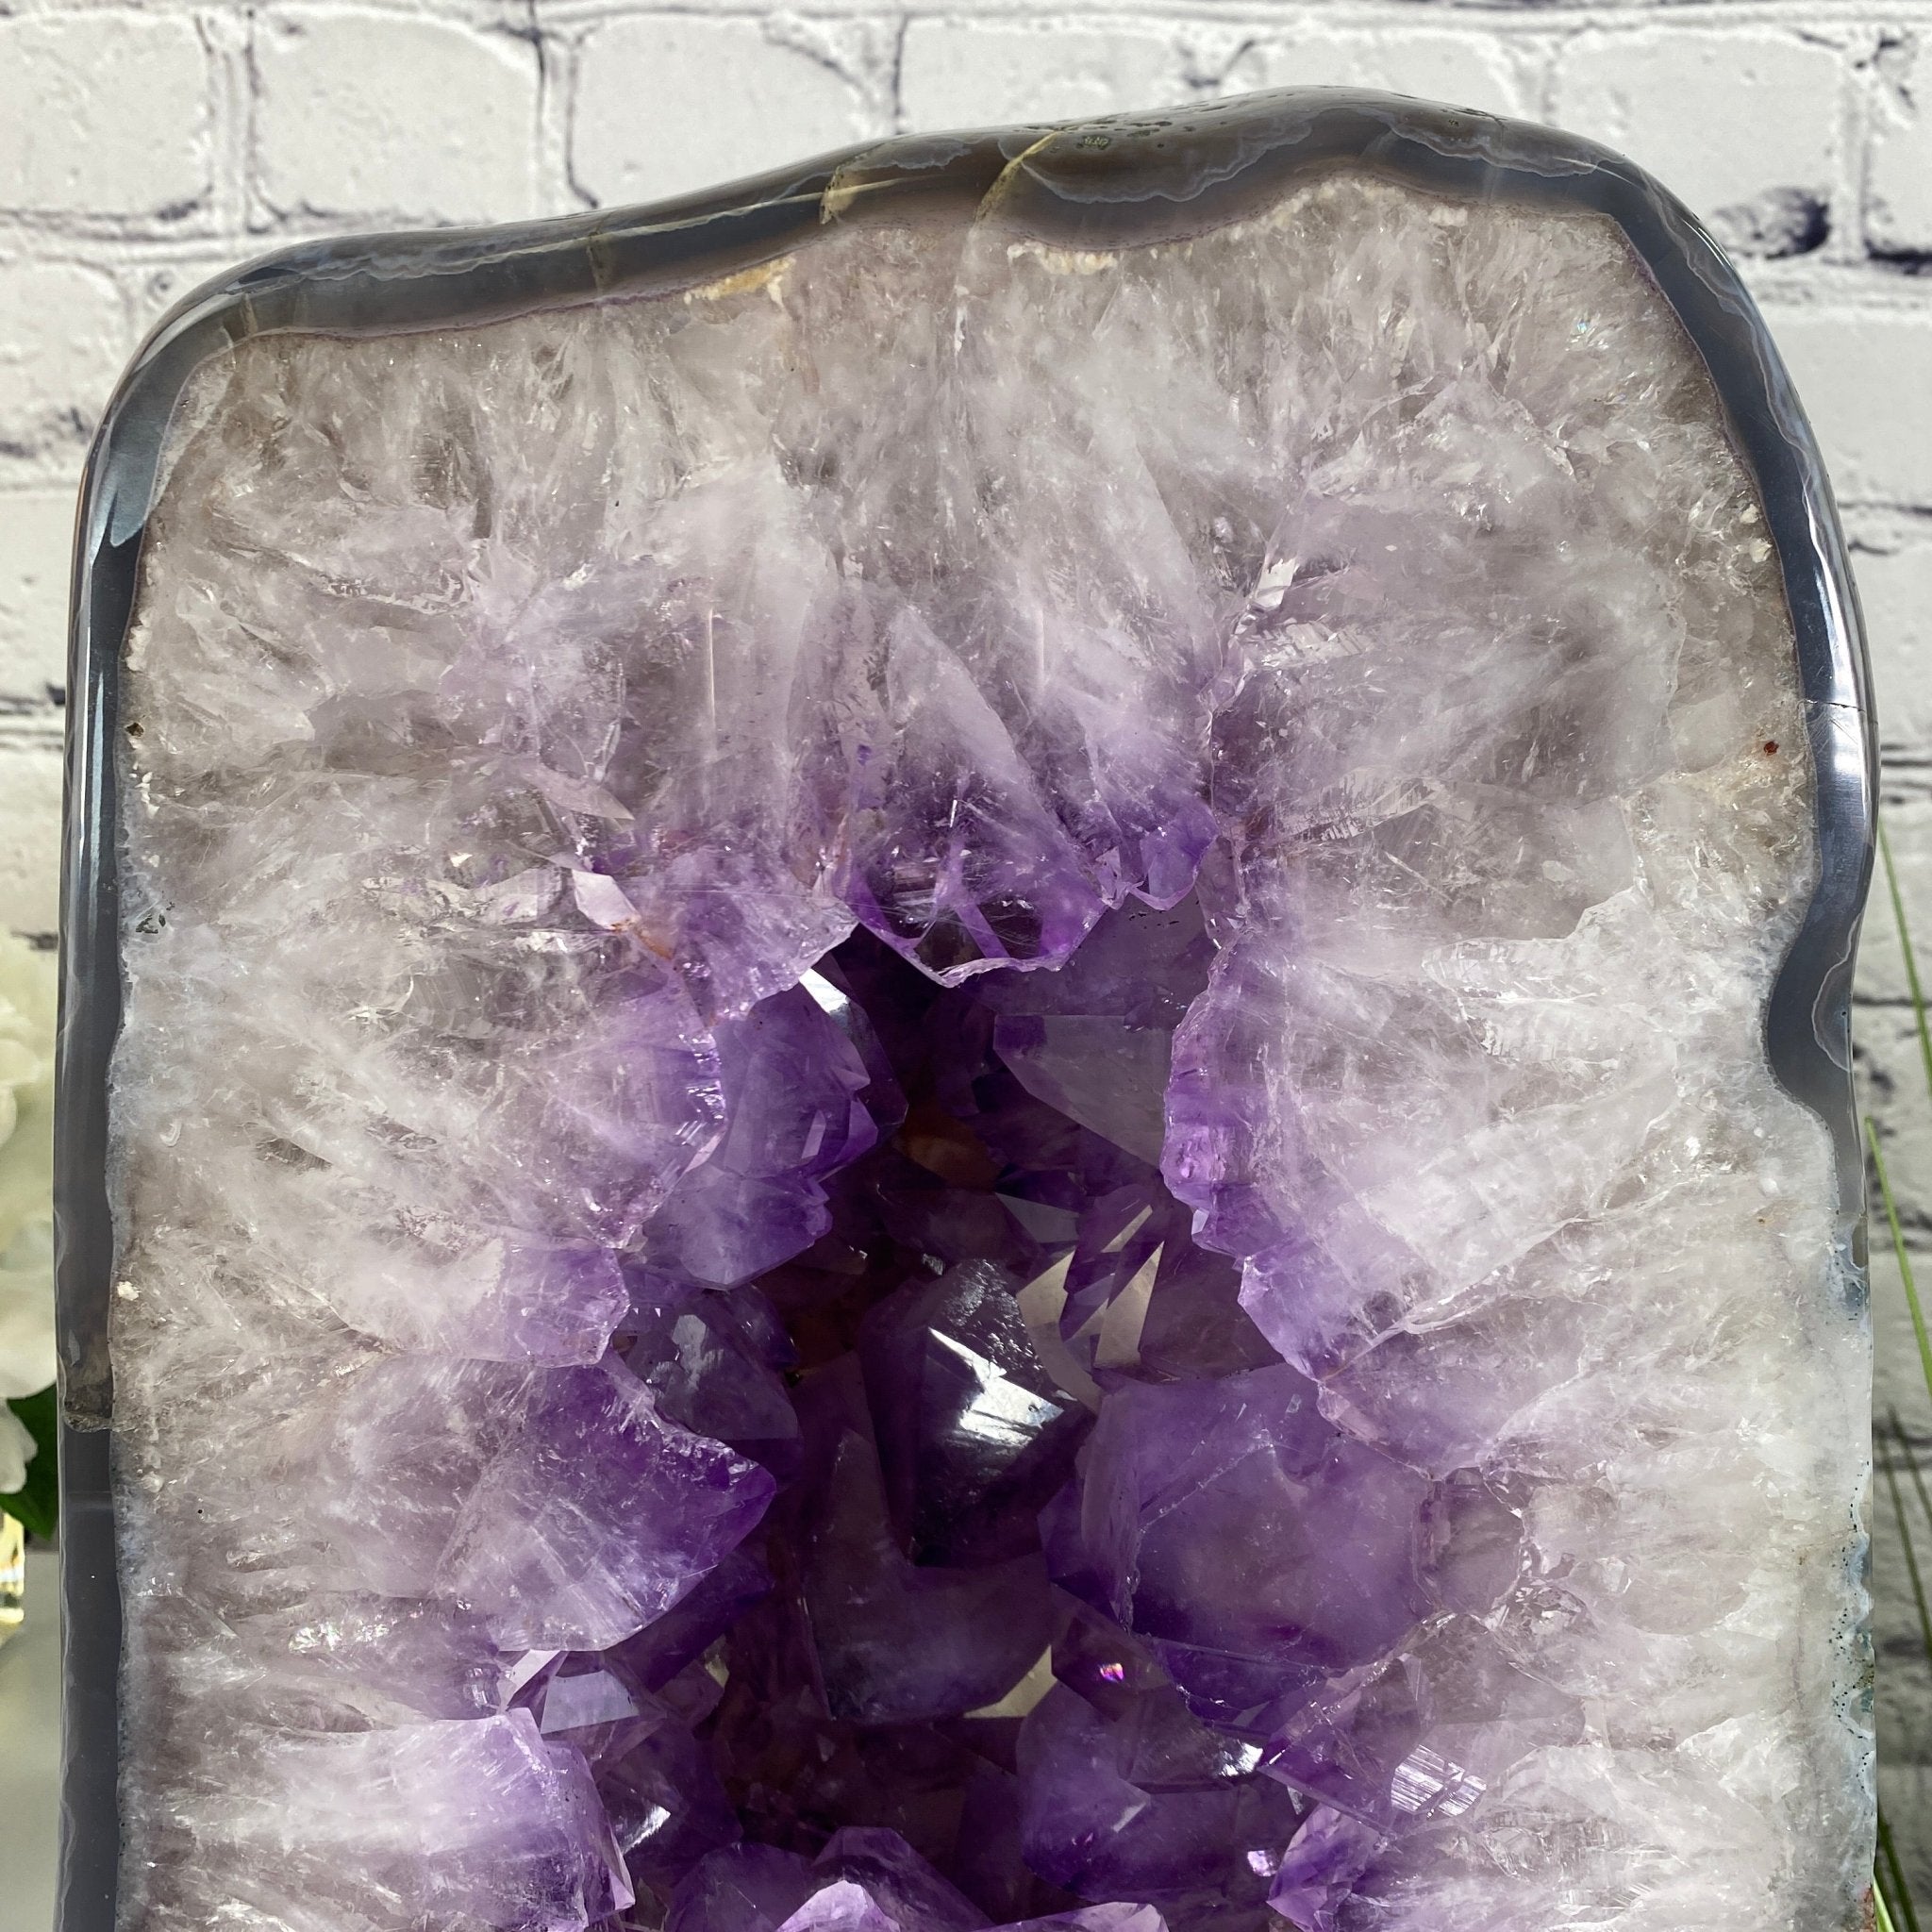 Extra Quality Polished Brazilian Amethyst Cathedral, 41.3 lbs & 12.7" tall Model #5602-0013 by Brazil Gems - Brazil GemsBrazil GemsExtra Quality Polished Brazilian Amethyst Cathedral, 41.3 lbs & 12.7" tall Model #5602-0013 by Brazil GemsPolished Cathedrals5602-0013